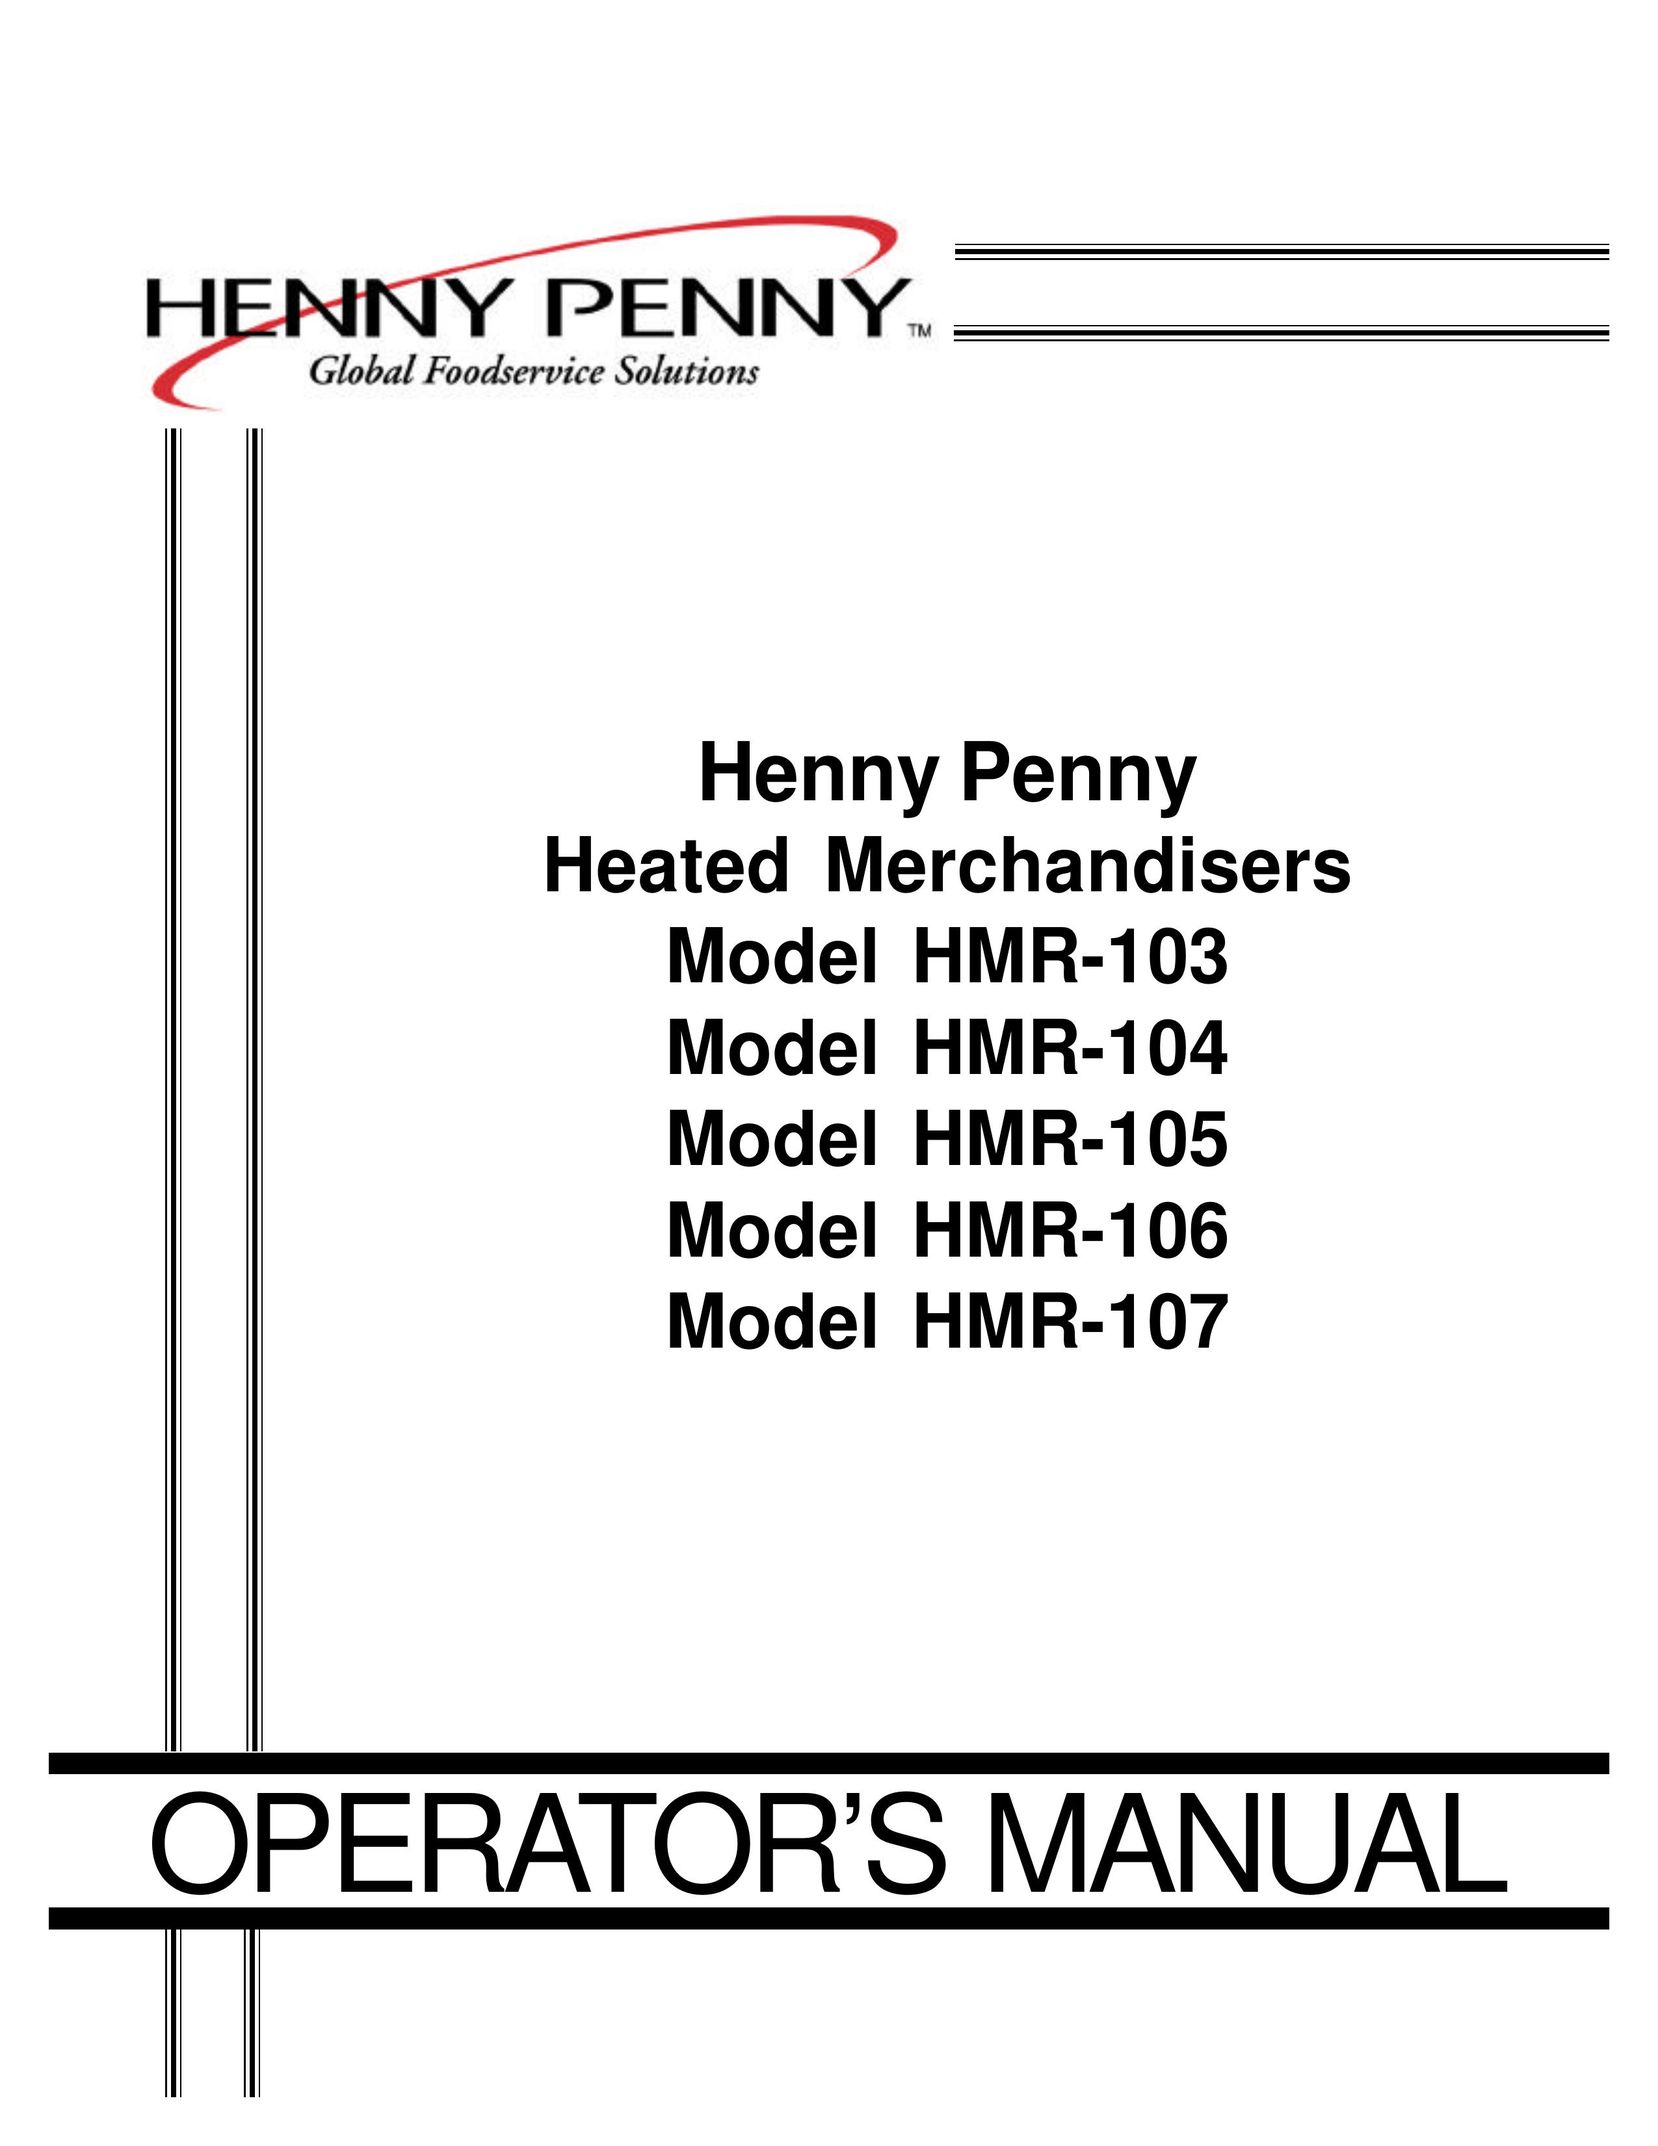 Henny Penny HMR-104 Electric Heater User Manual